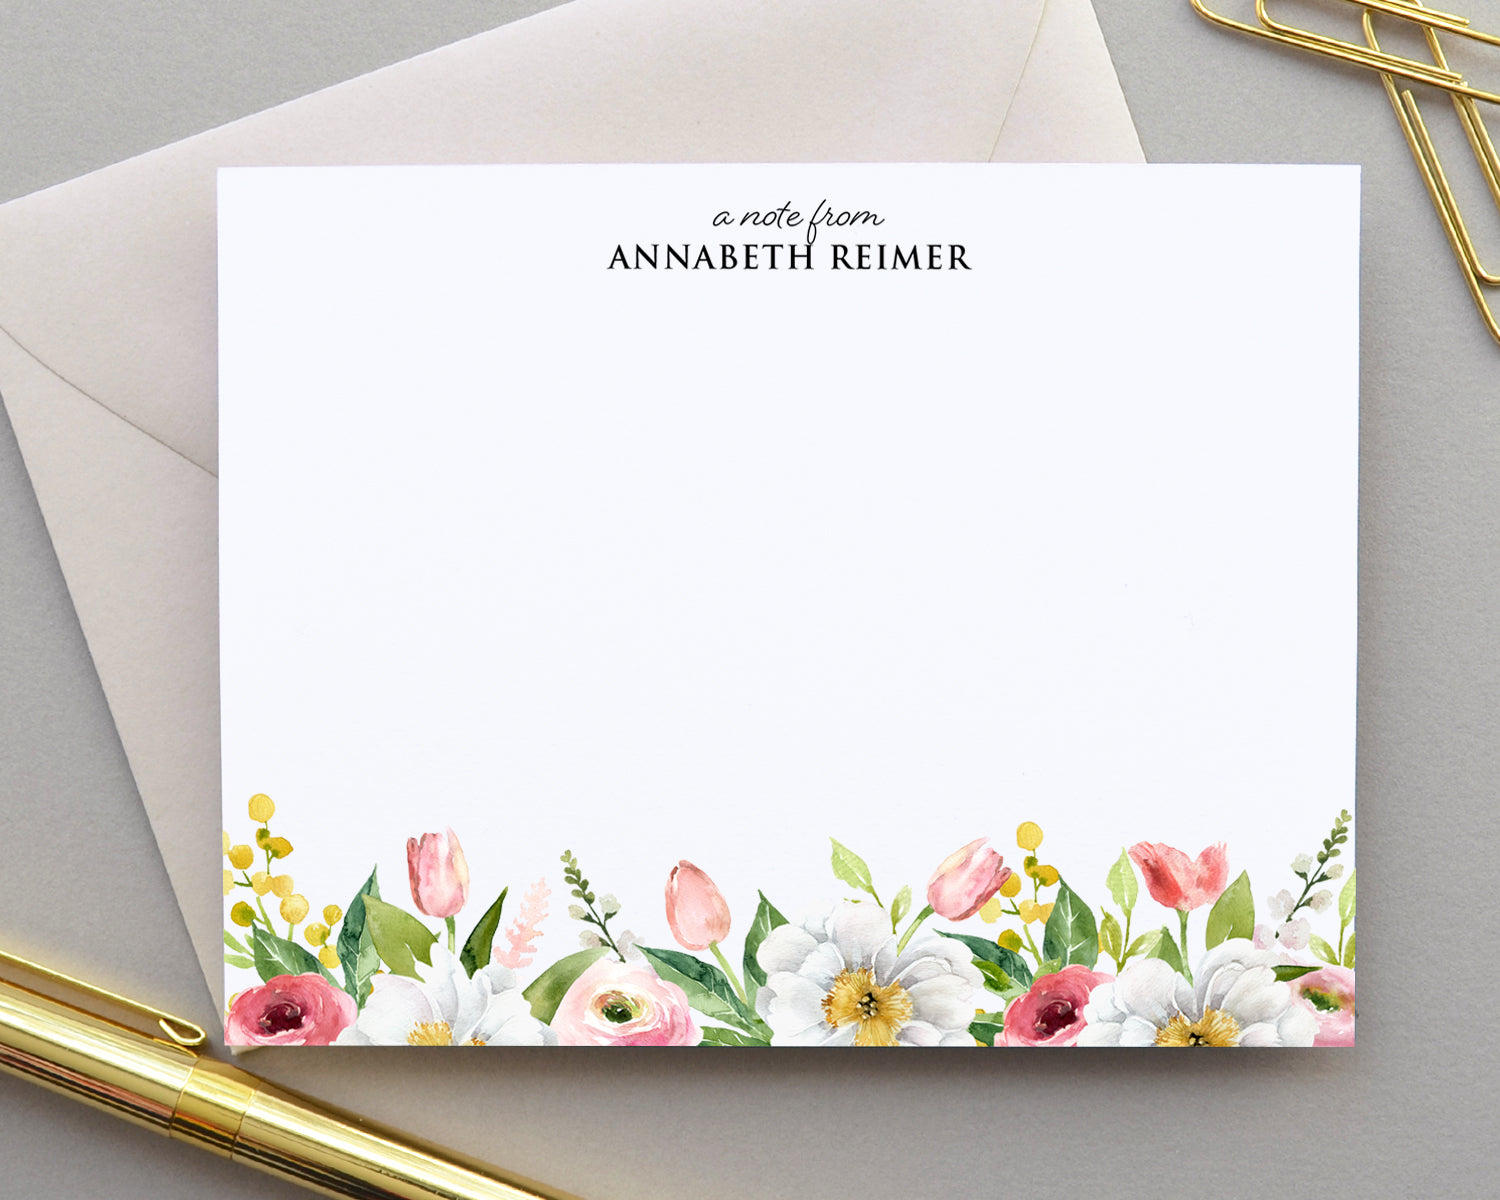 Floral Personalized Note Card and Envelope Stationery Set for Women - Blush  Pink Watercolor Flower Design with Name - Choose Ink and Envelope Colors 